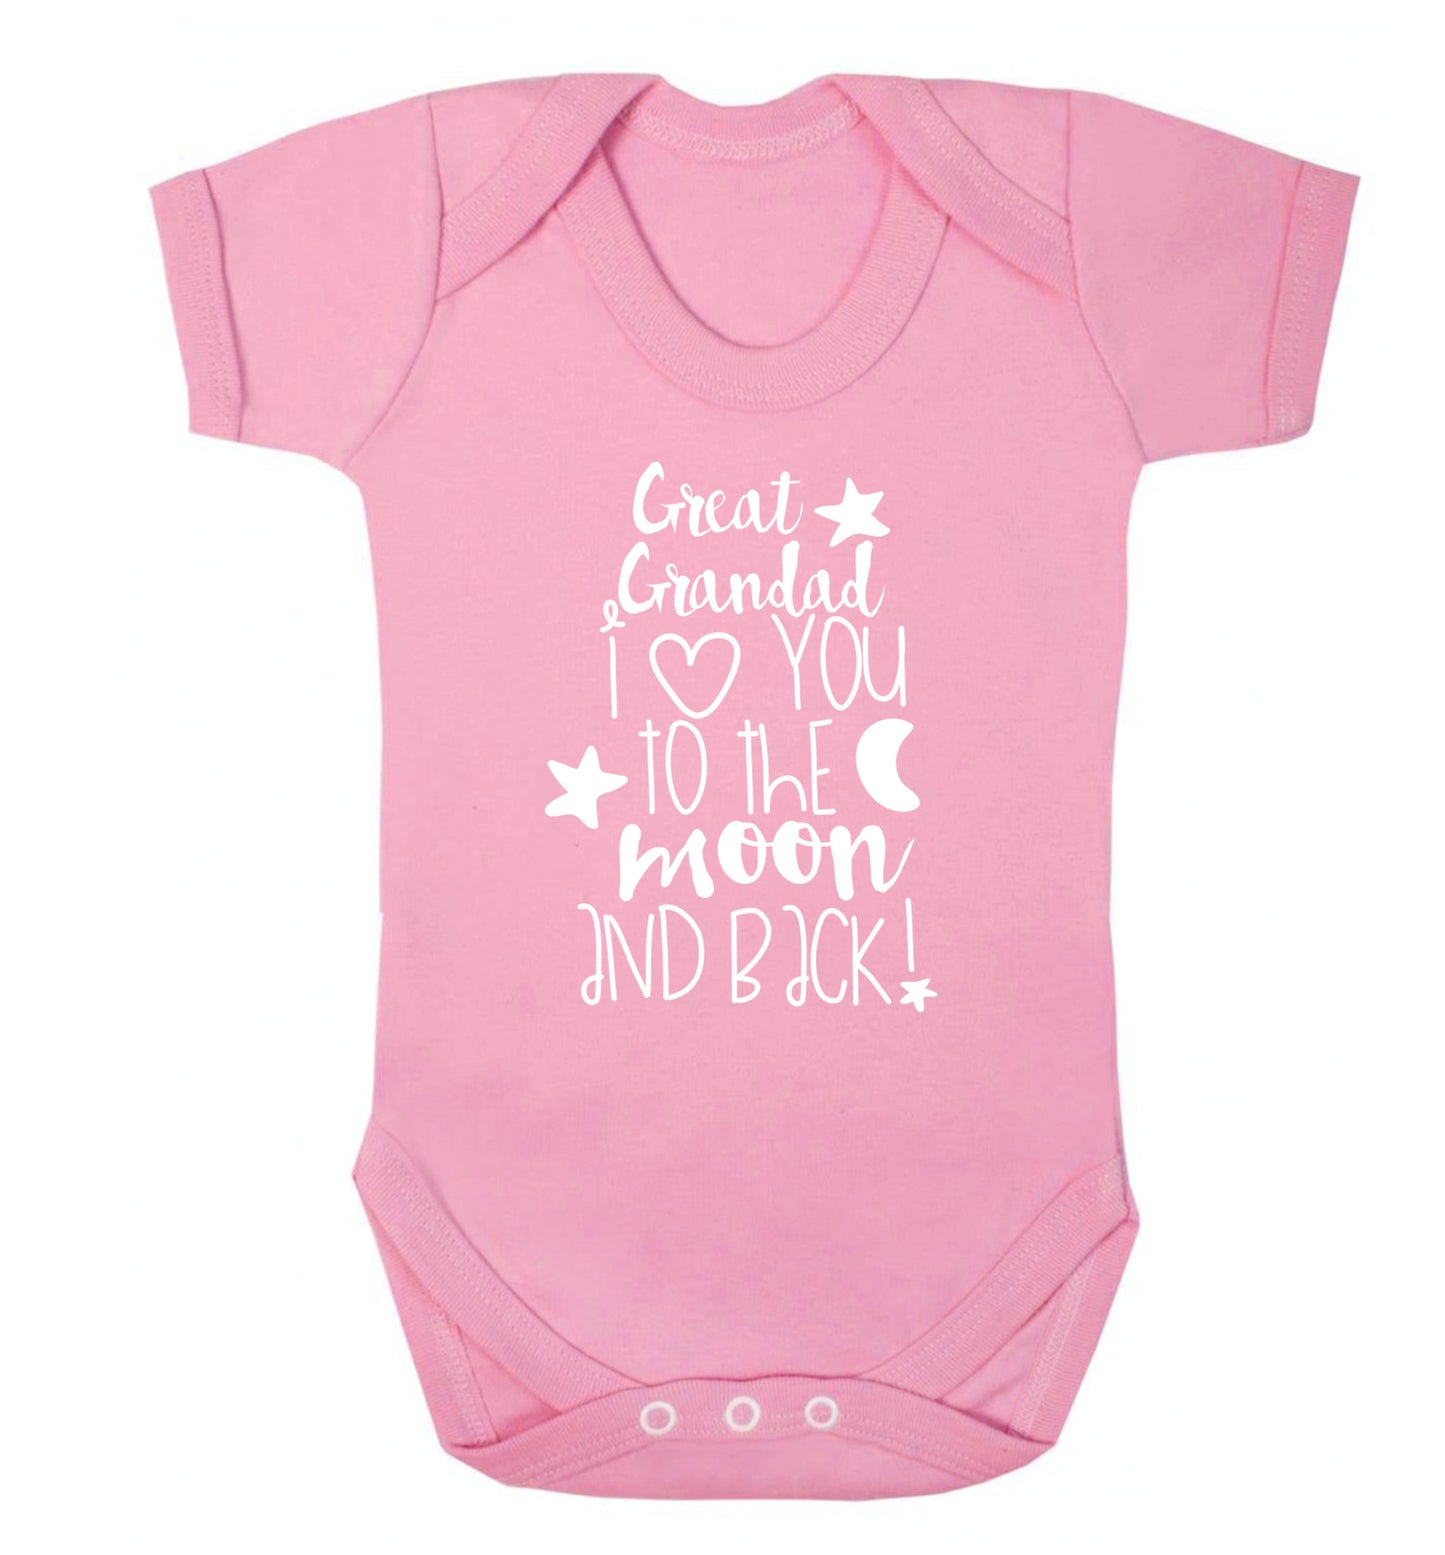 Great Grandad I love you to the moon and back Baby Vest pale pink 18-24 months